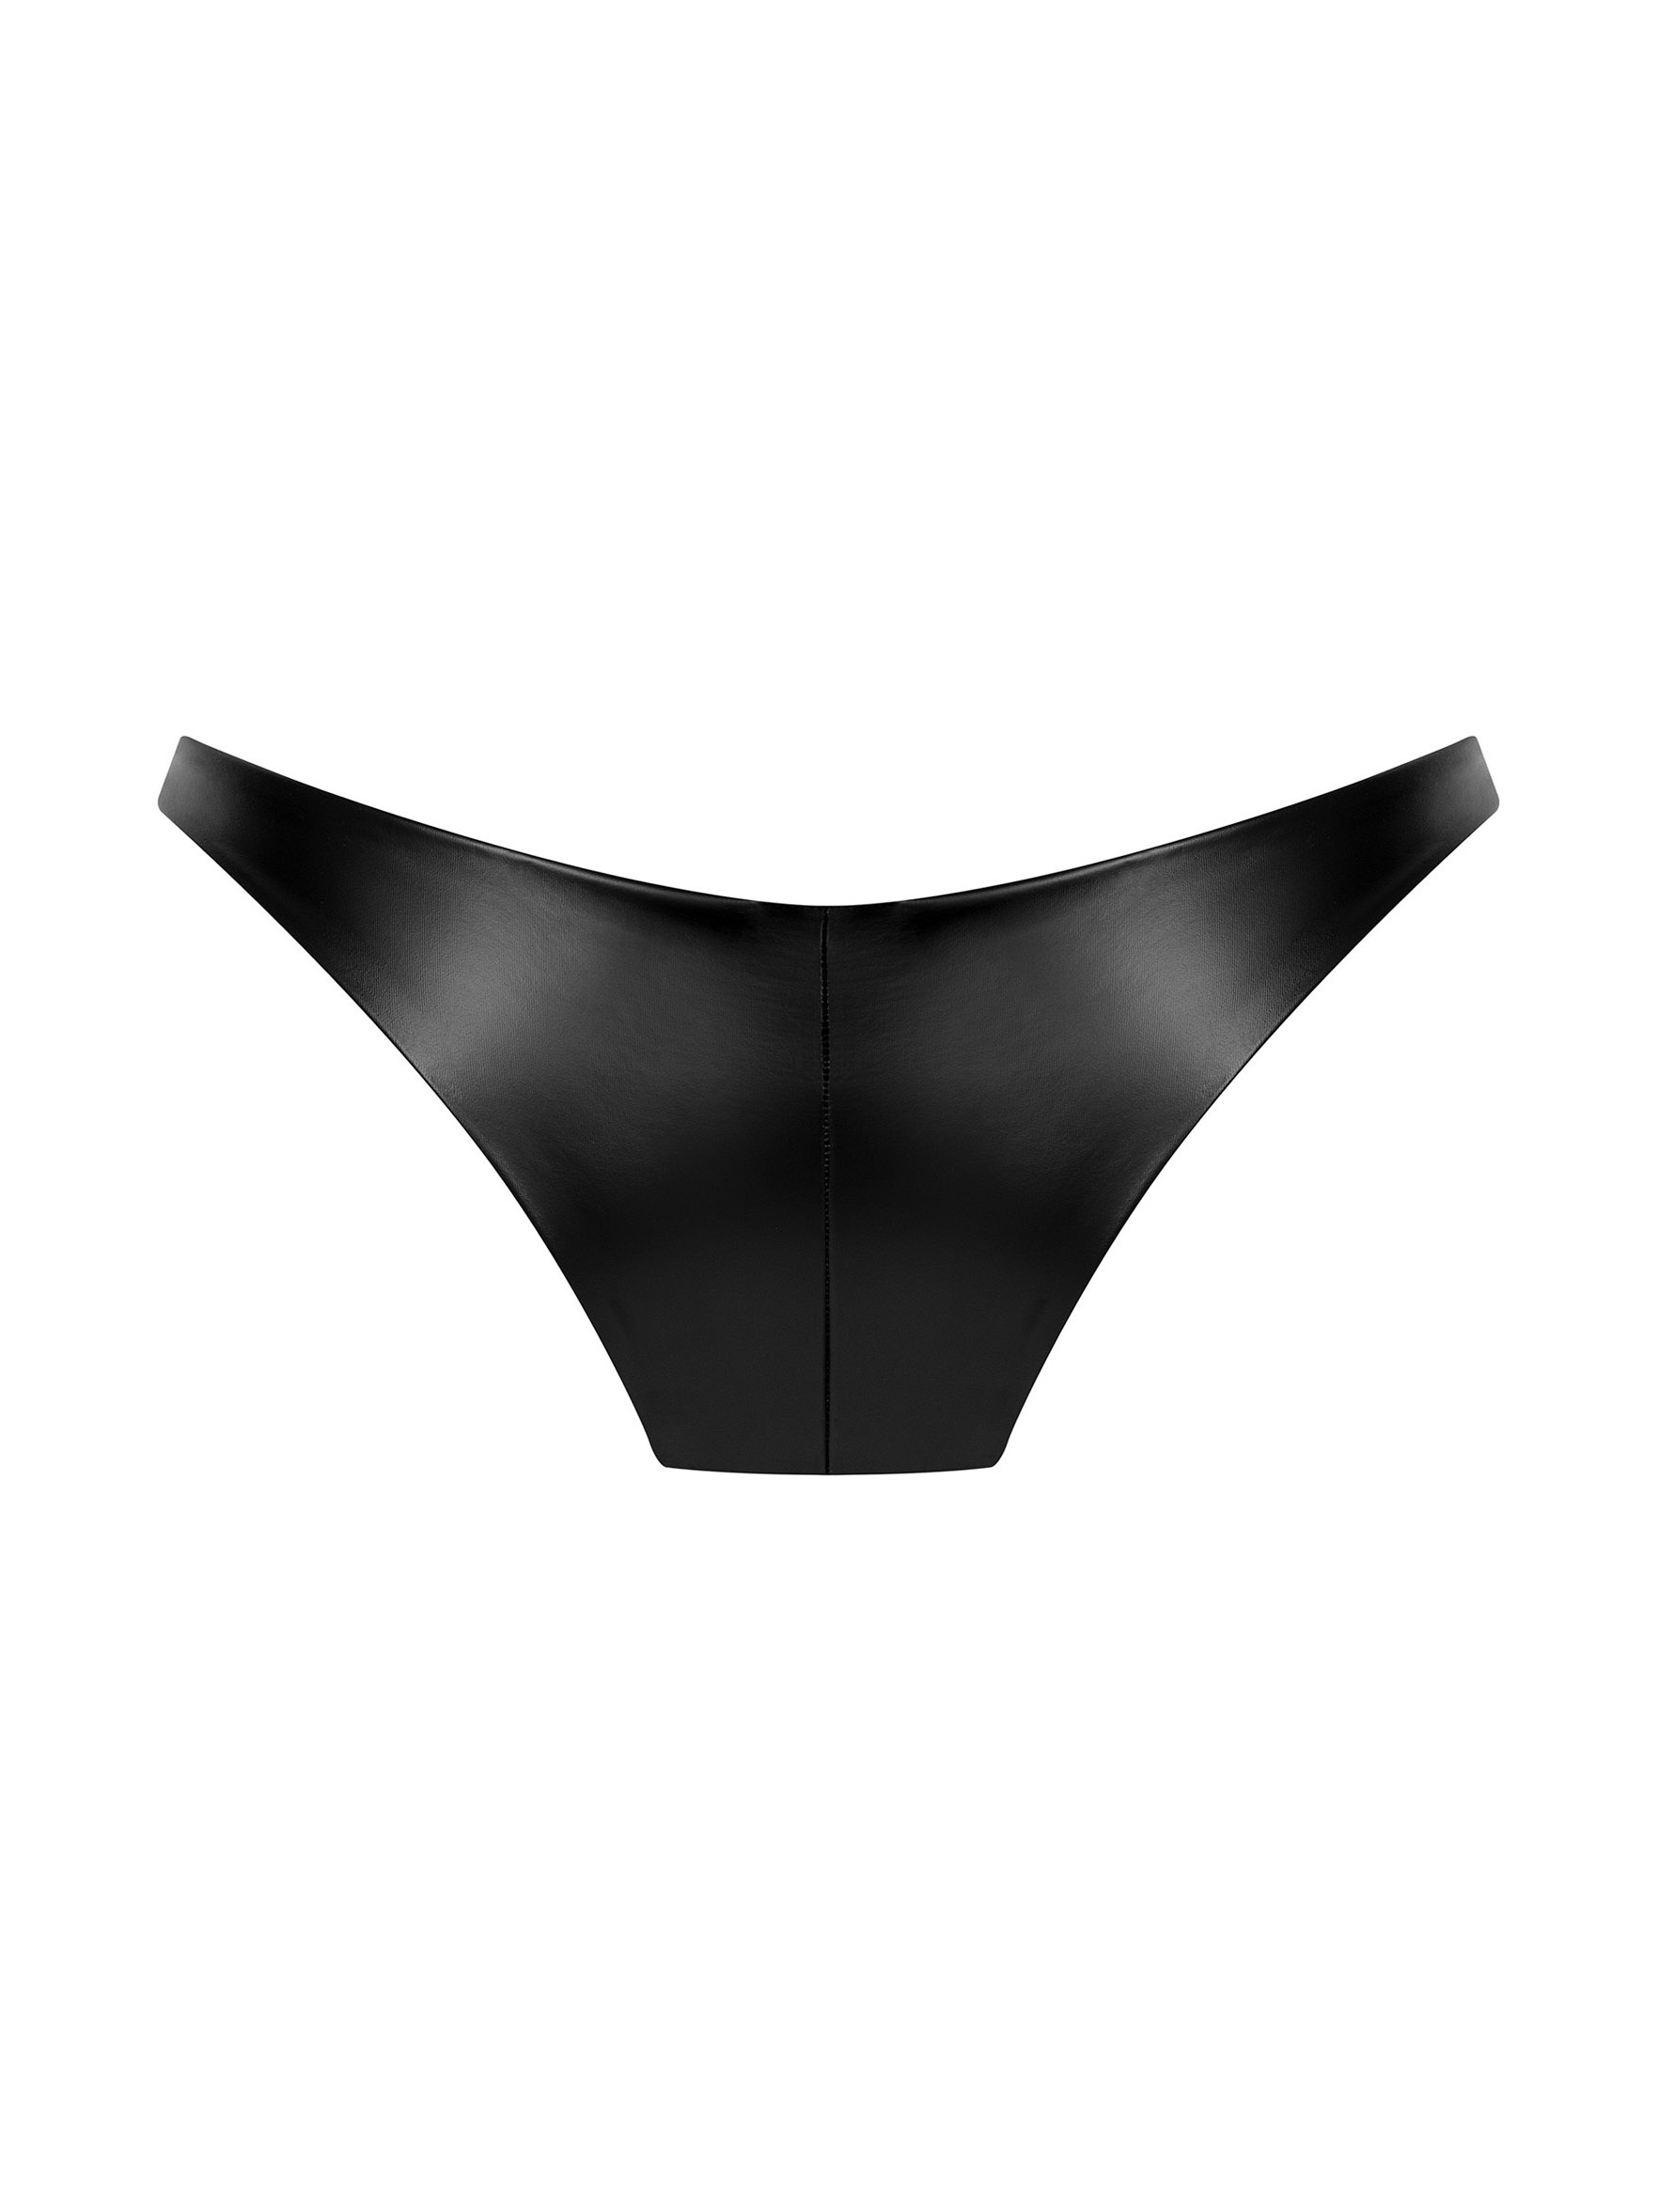 Sexy women's imitation leather panties with viscose lining Obsessive Viranes #6